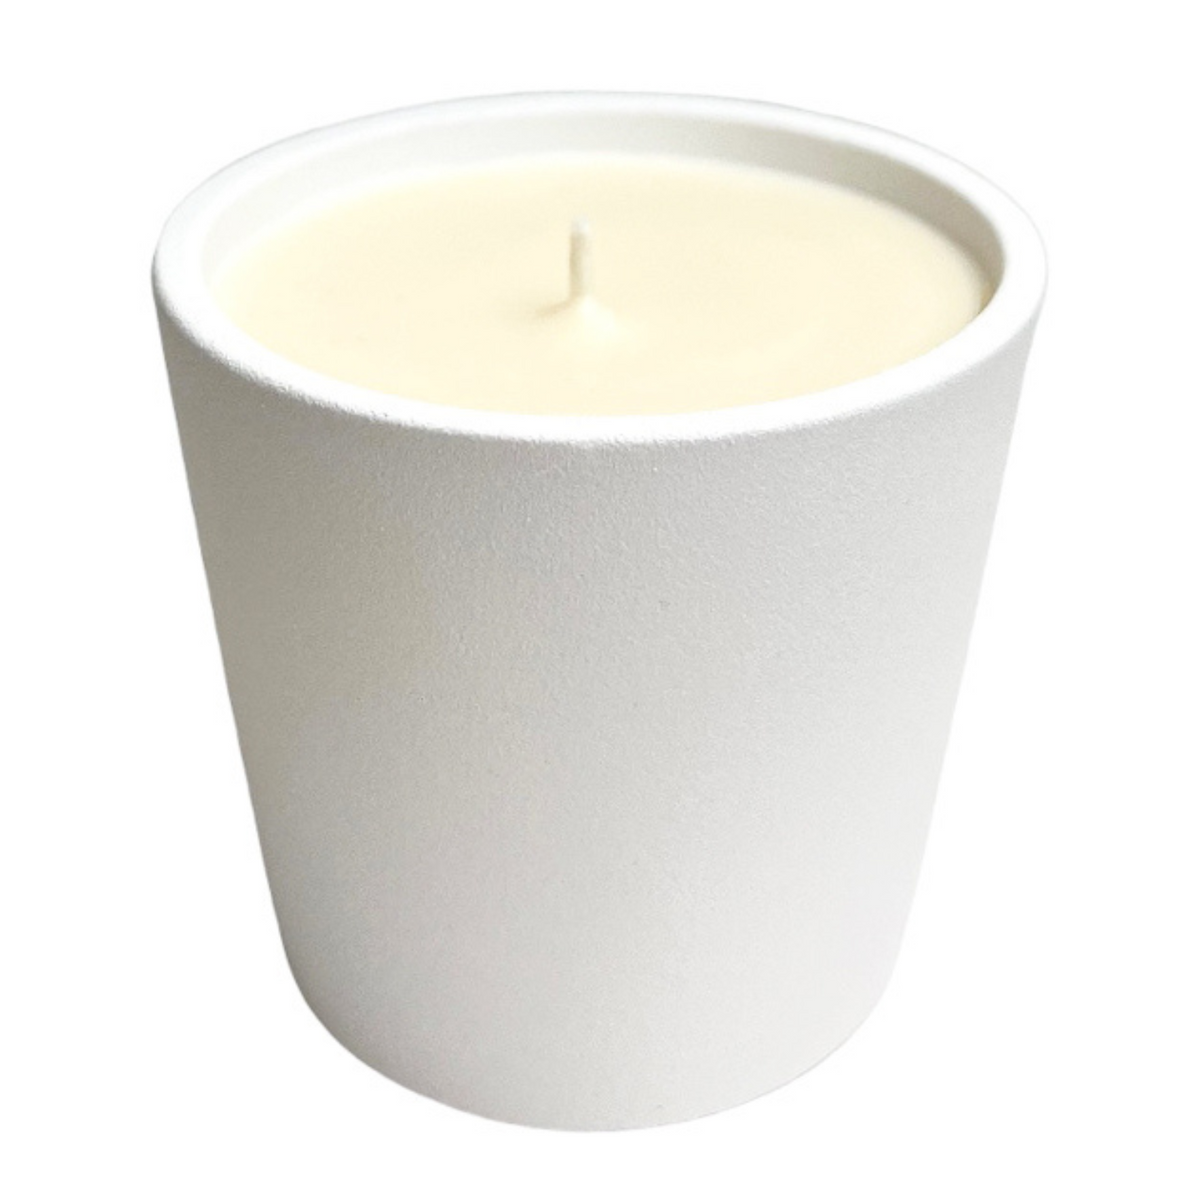 Evergreen soy candle